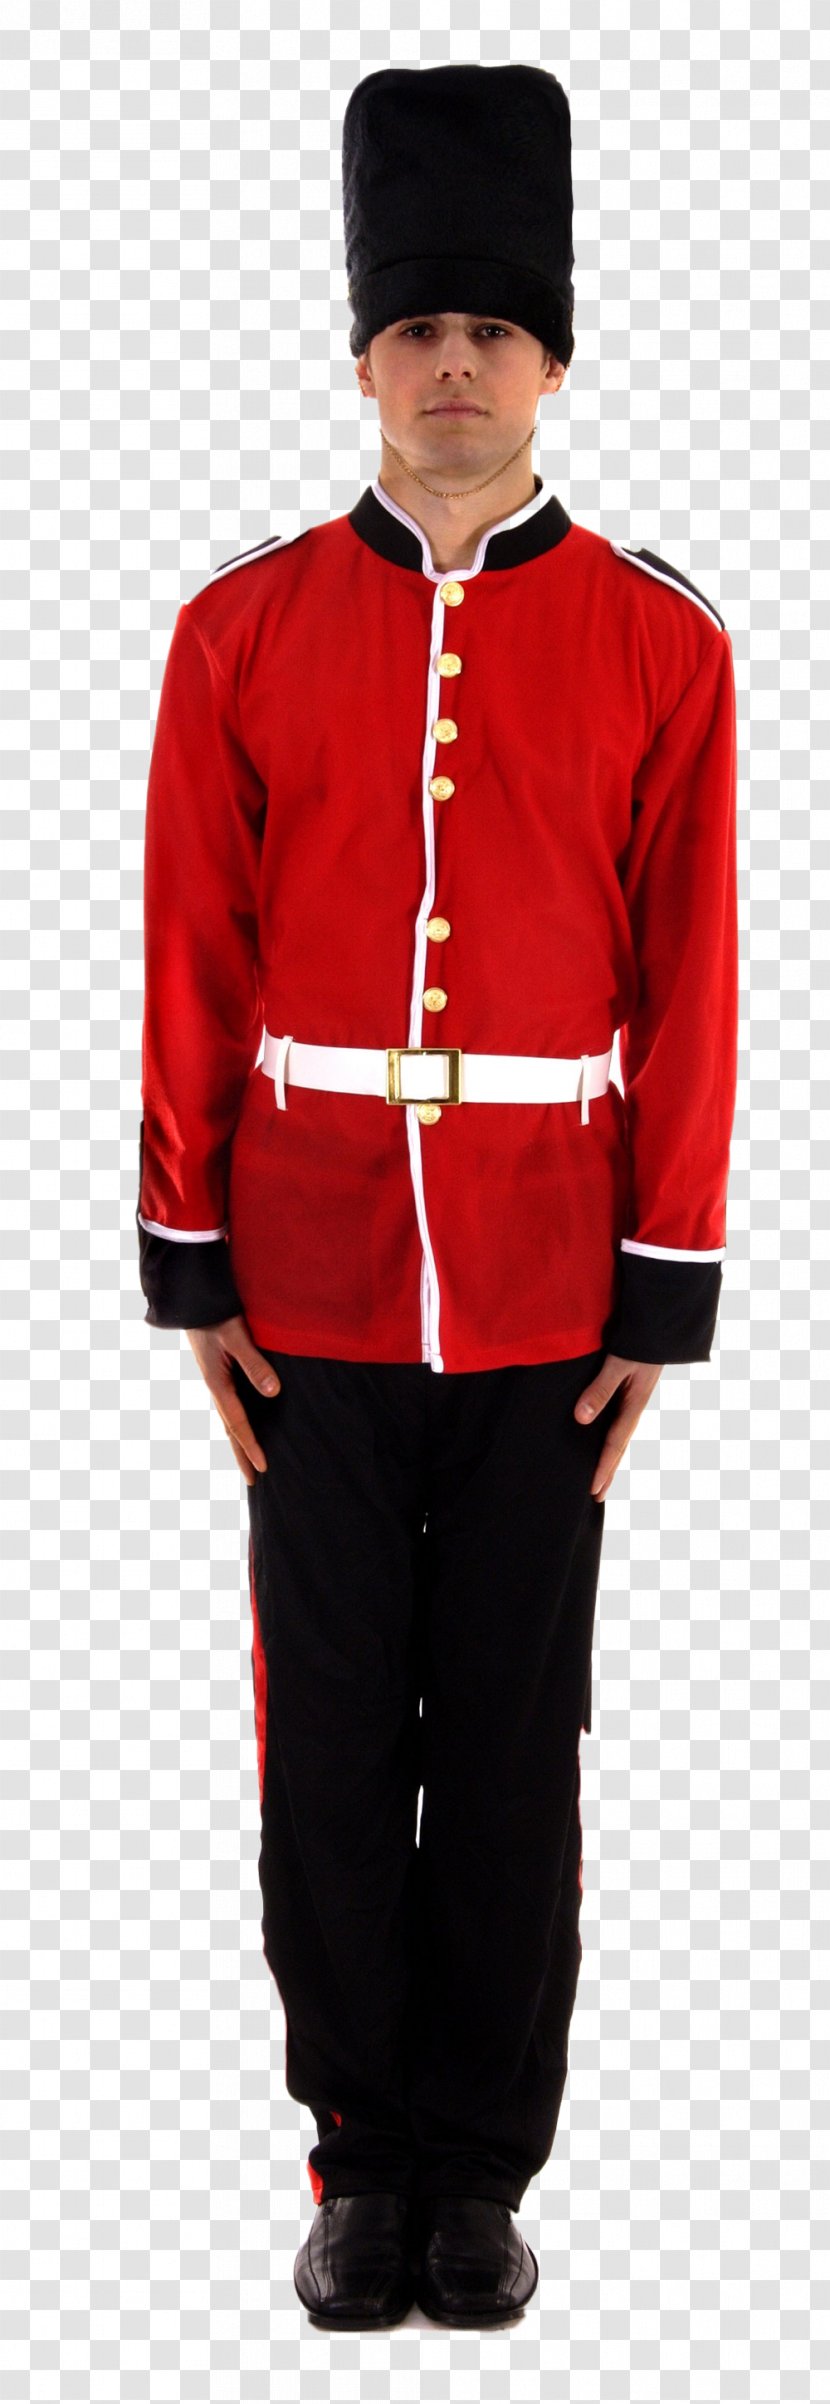 Queen's Guard Costume Party Amazon.com Busby - Clothing - United Kingdom Transparent PNG